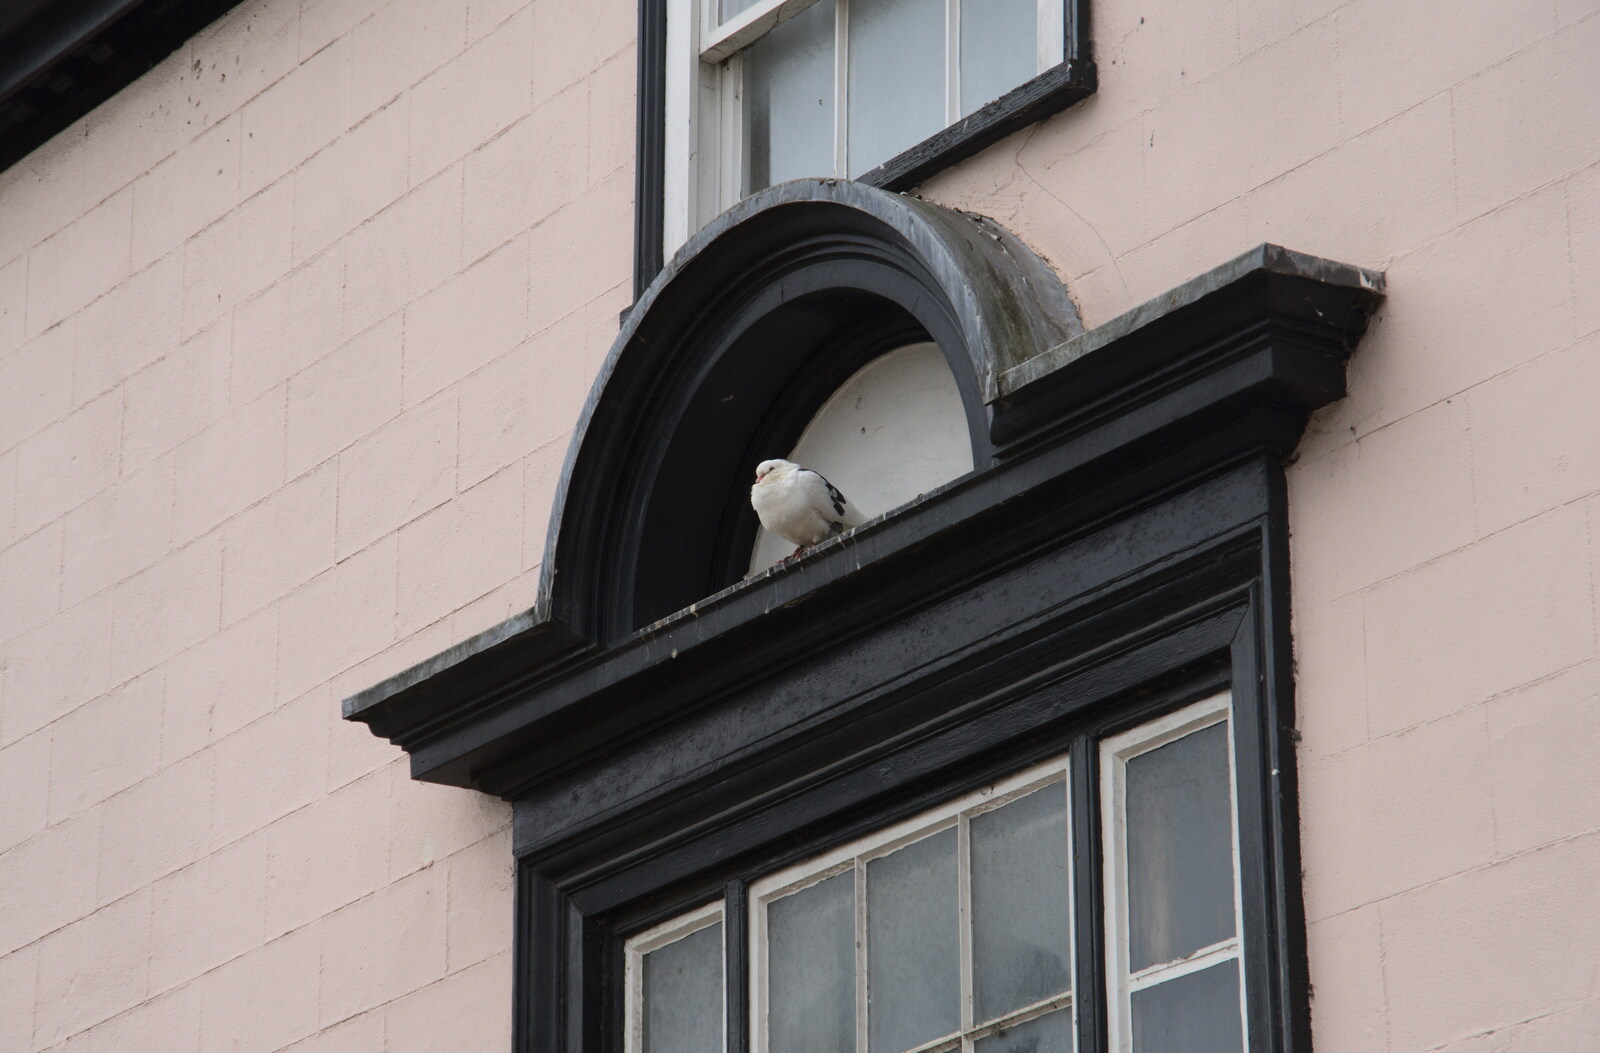 A pigeon perches on a window from A Walk Around Town, Diss, Norfolk - 10th October 2020